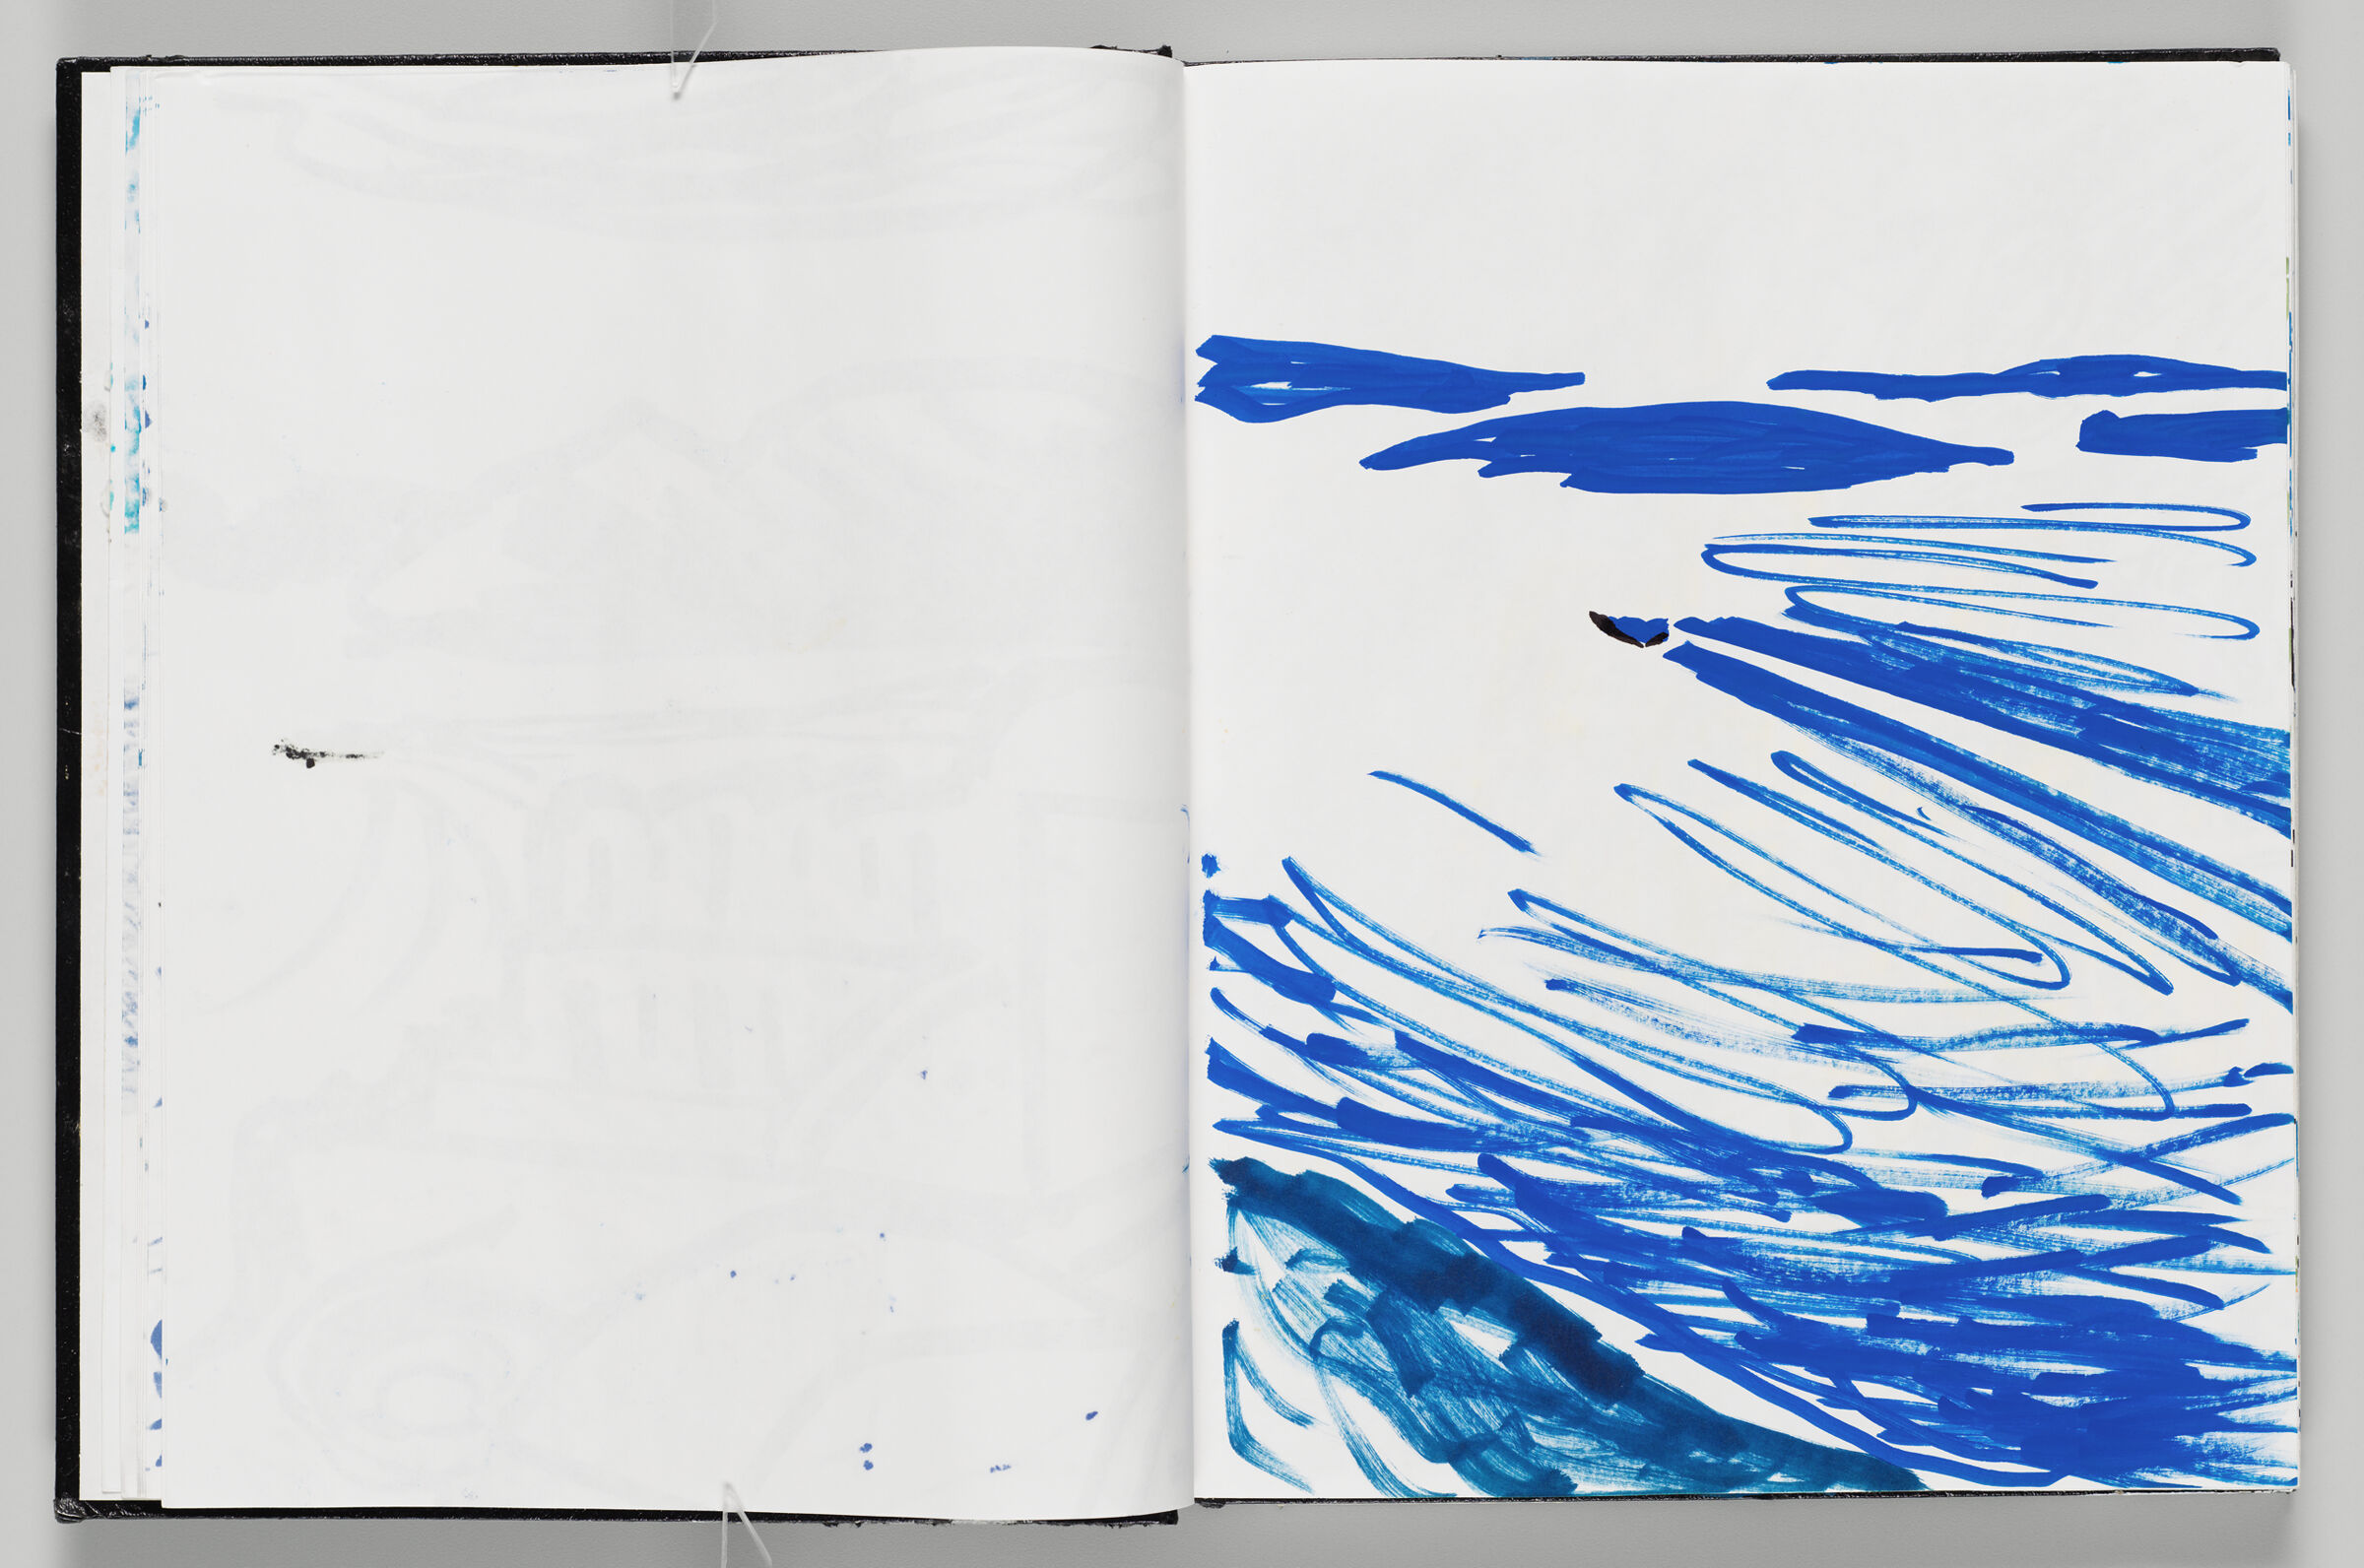 Untitled (Bleed-Through Of Previous Page, Left Page); Untitled (Seascape, Right Page)